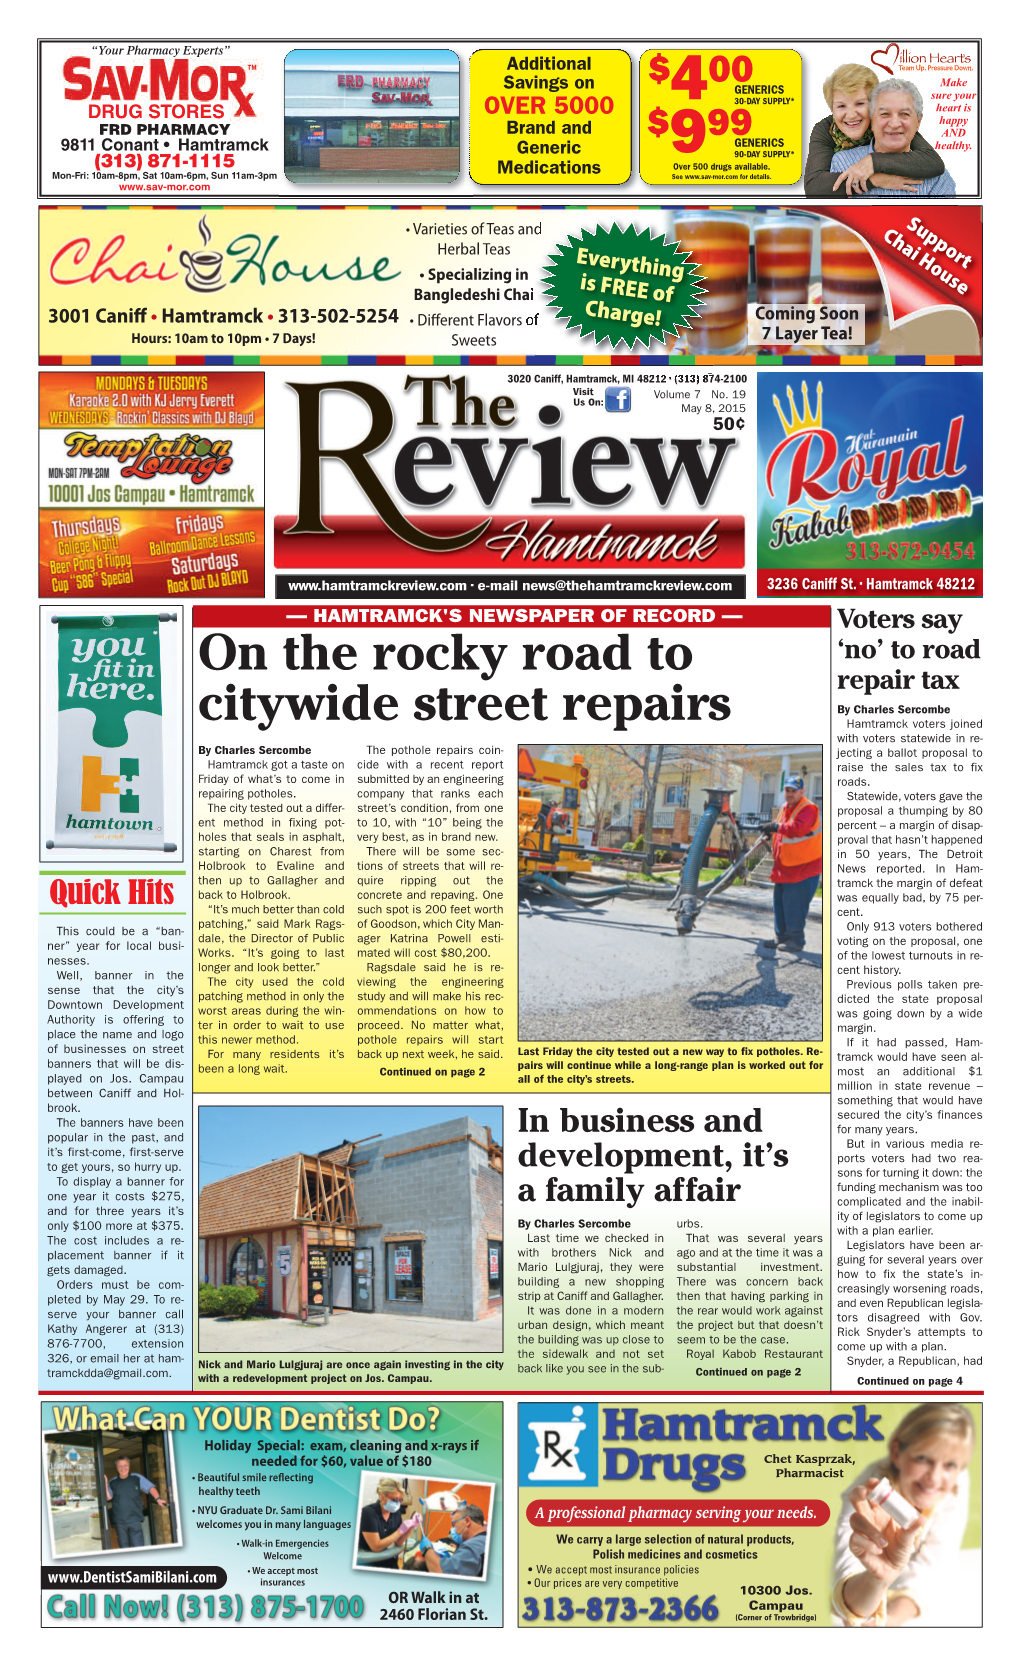 The Hamtramck Review5/8/15